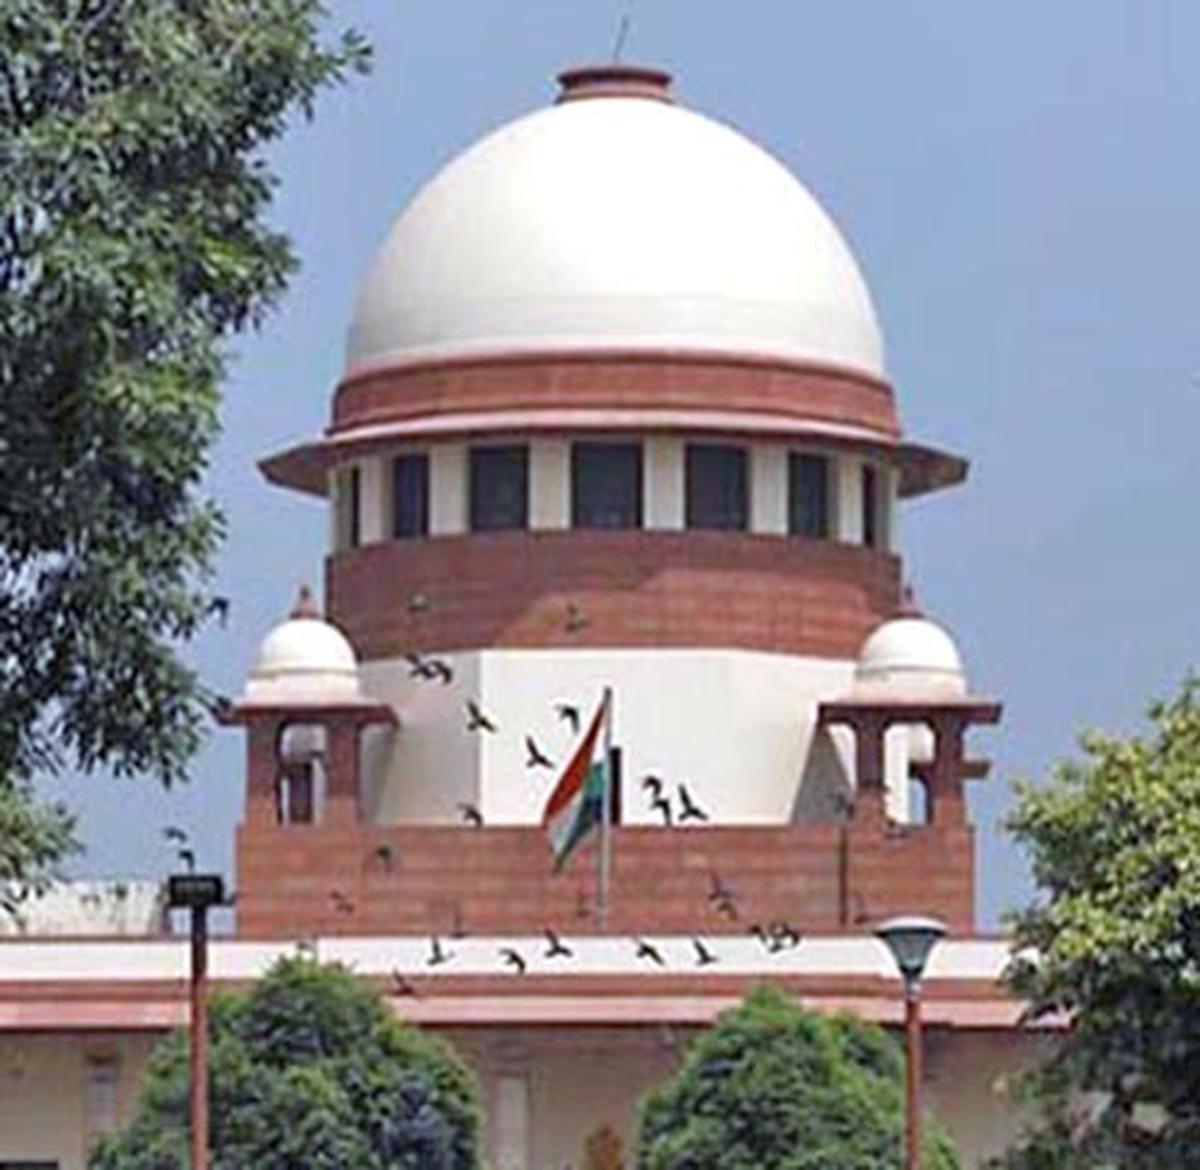 A general view of the main building of the Supreme Court of India in New Delhi, India, on Thursday.